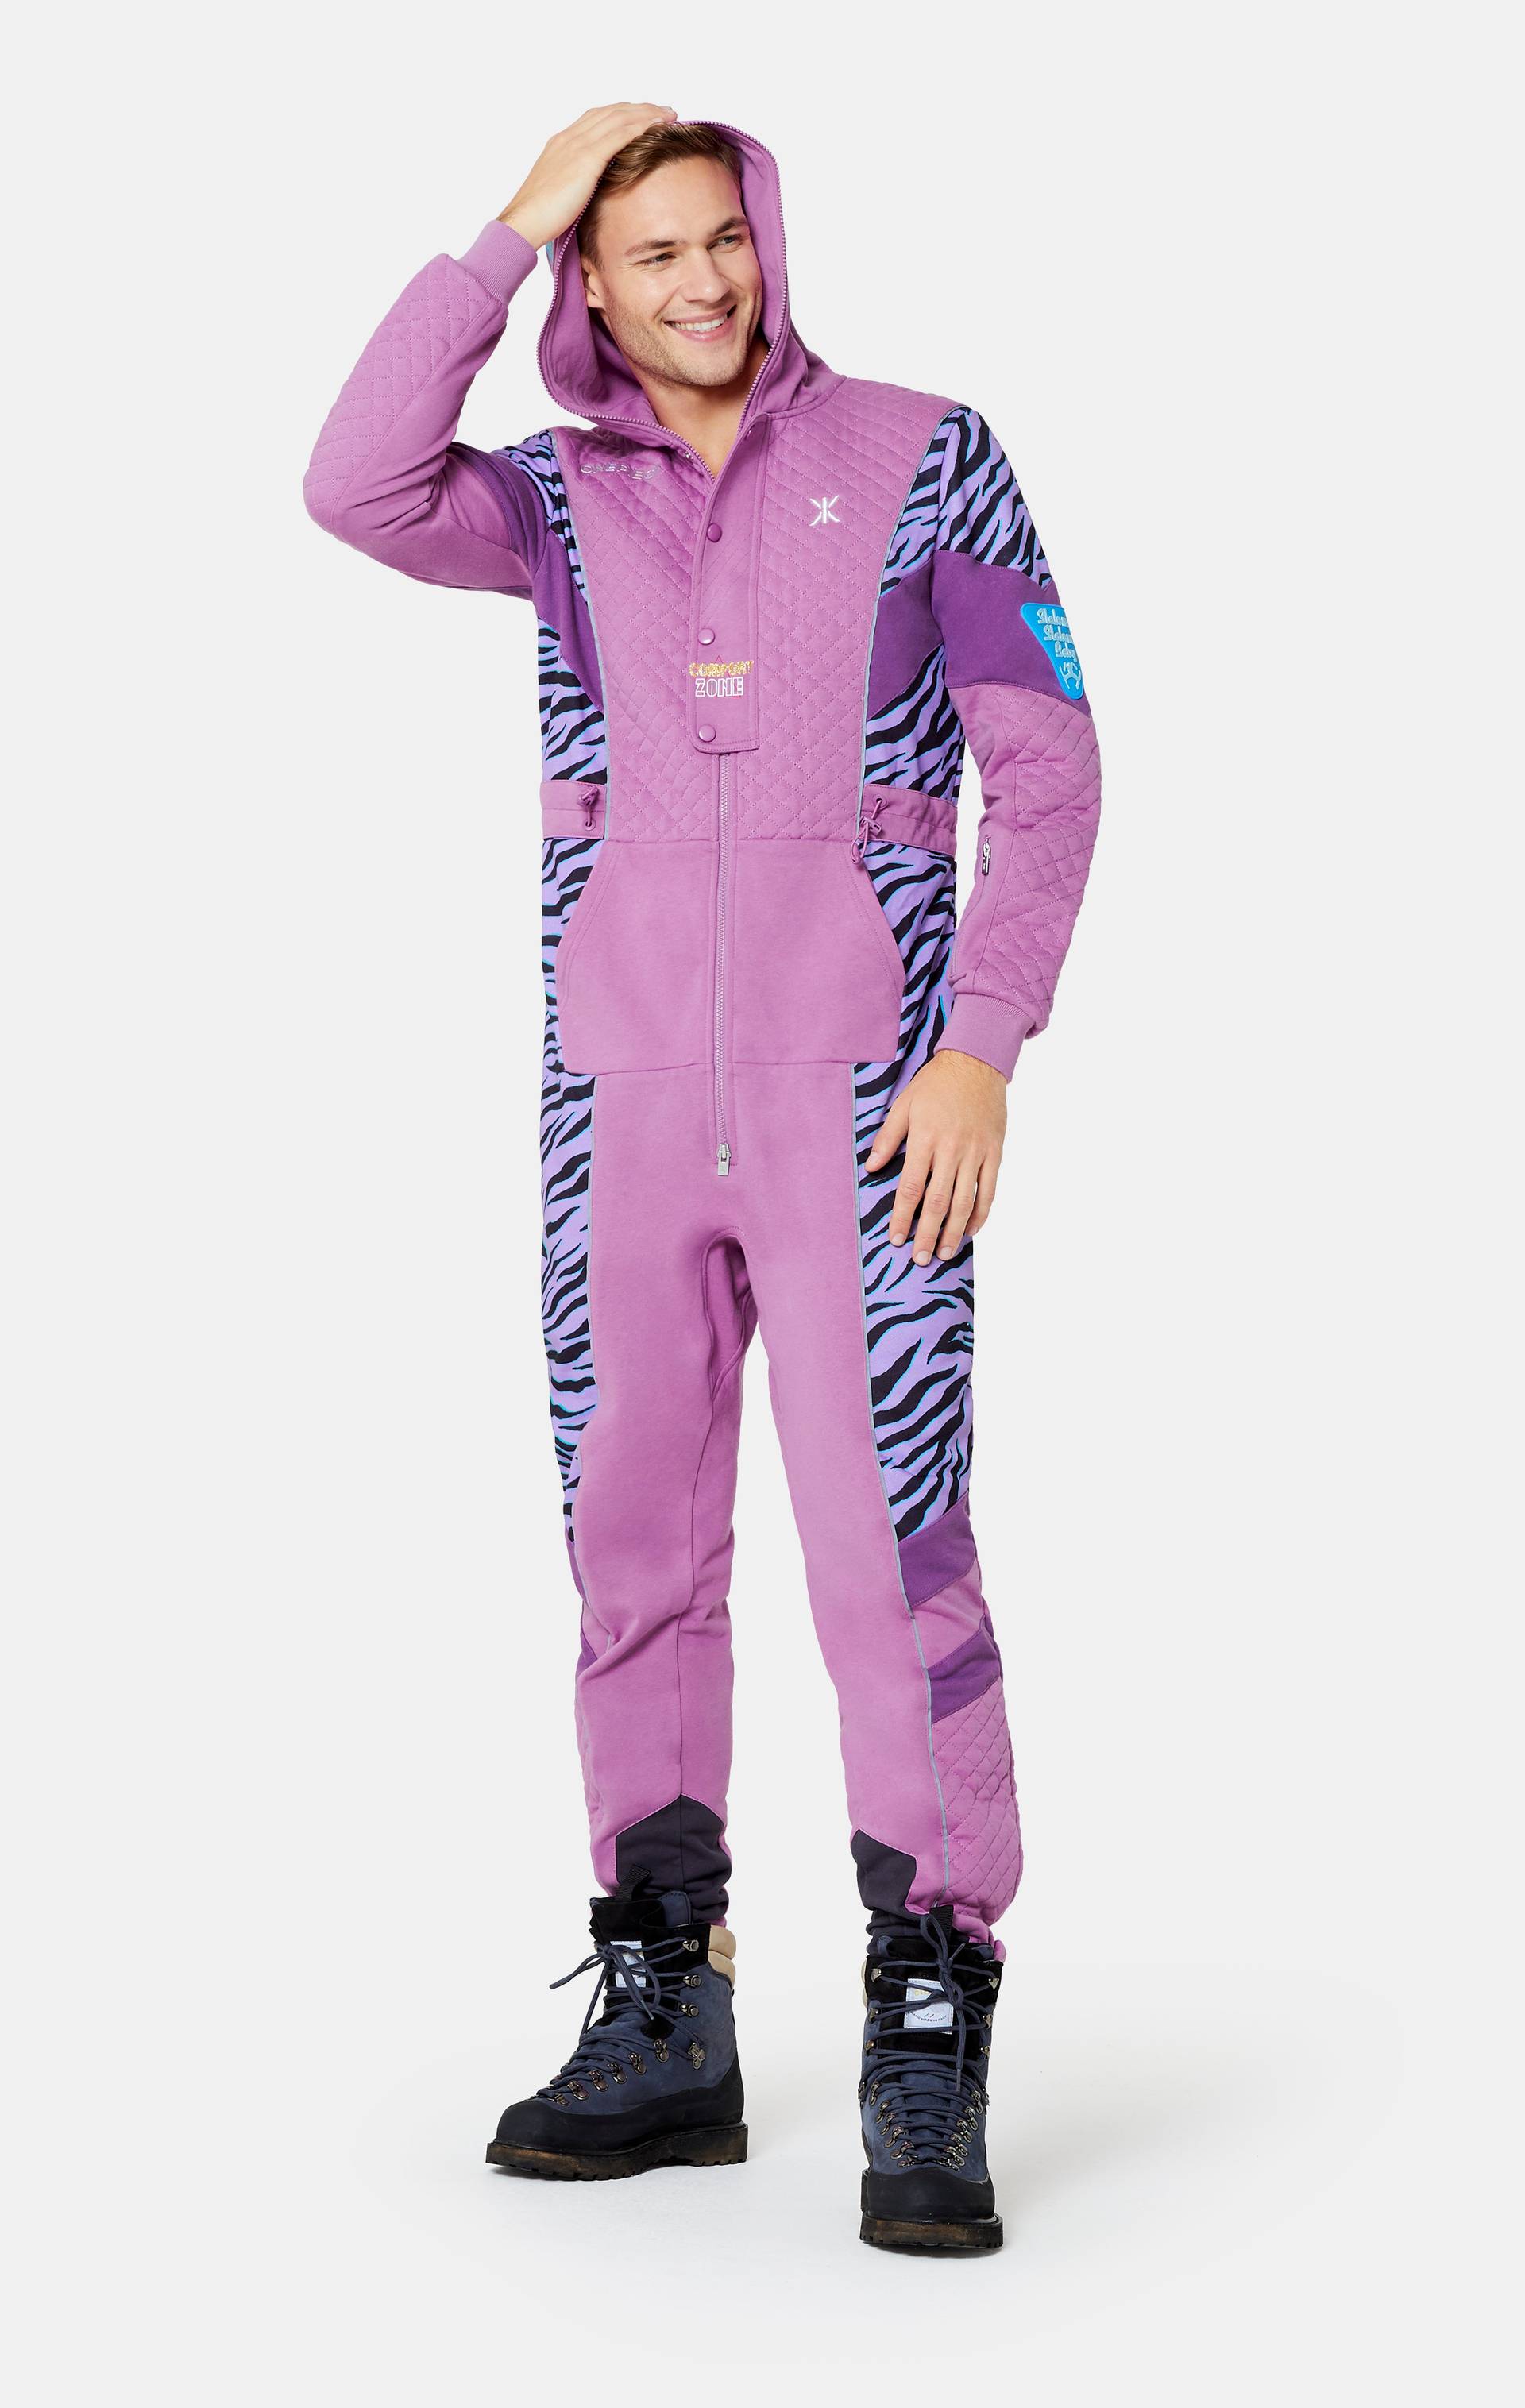 Onepiece Throwback Skiing Jumpsuit Pink - 5